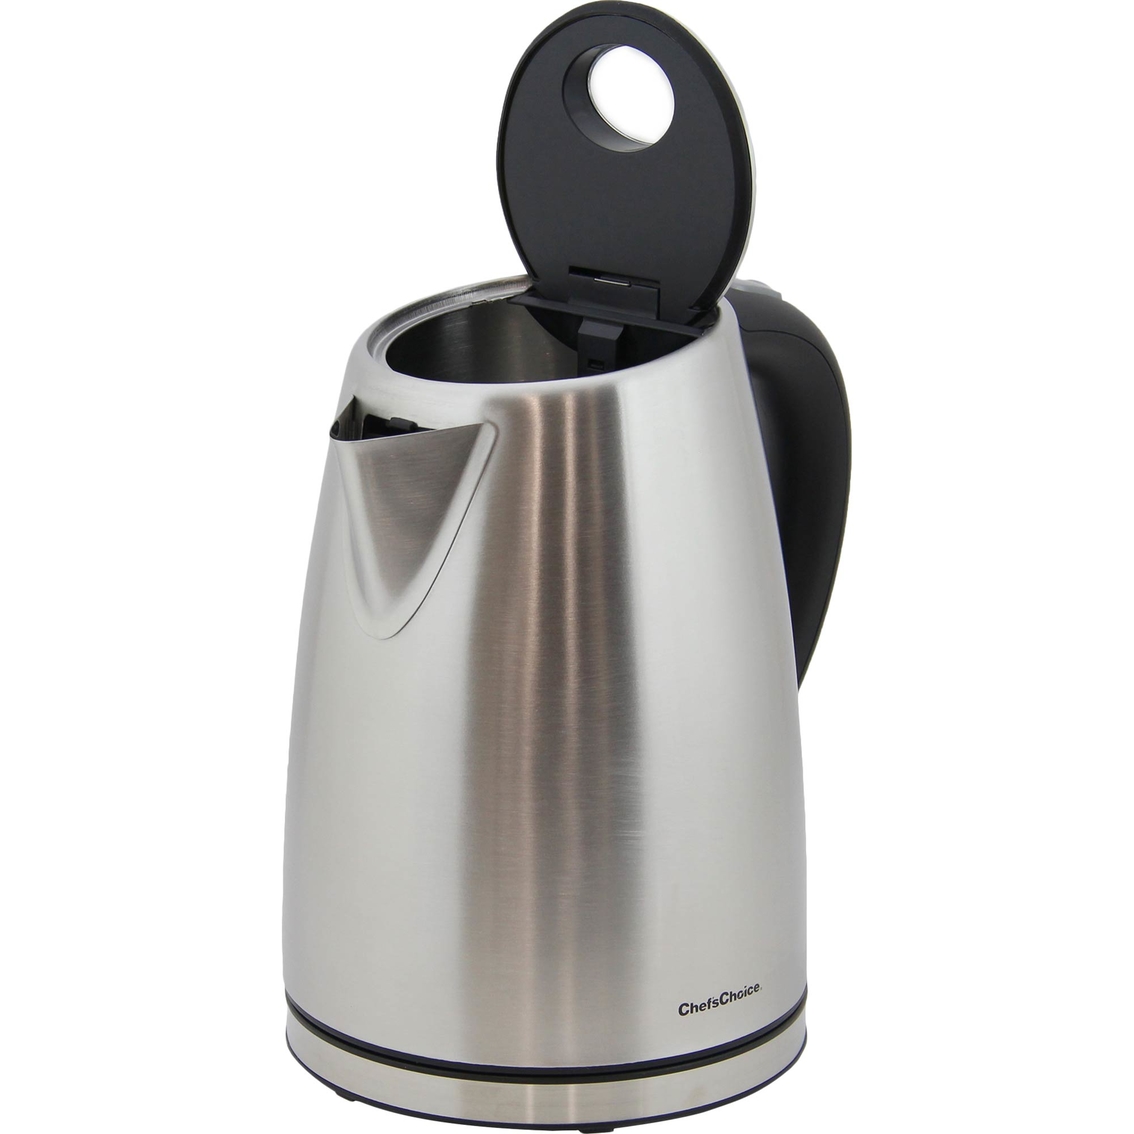 Chef's Choice Cordless Electric Kettle - Image 3 of 4